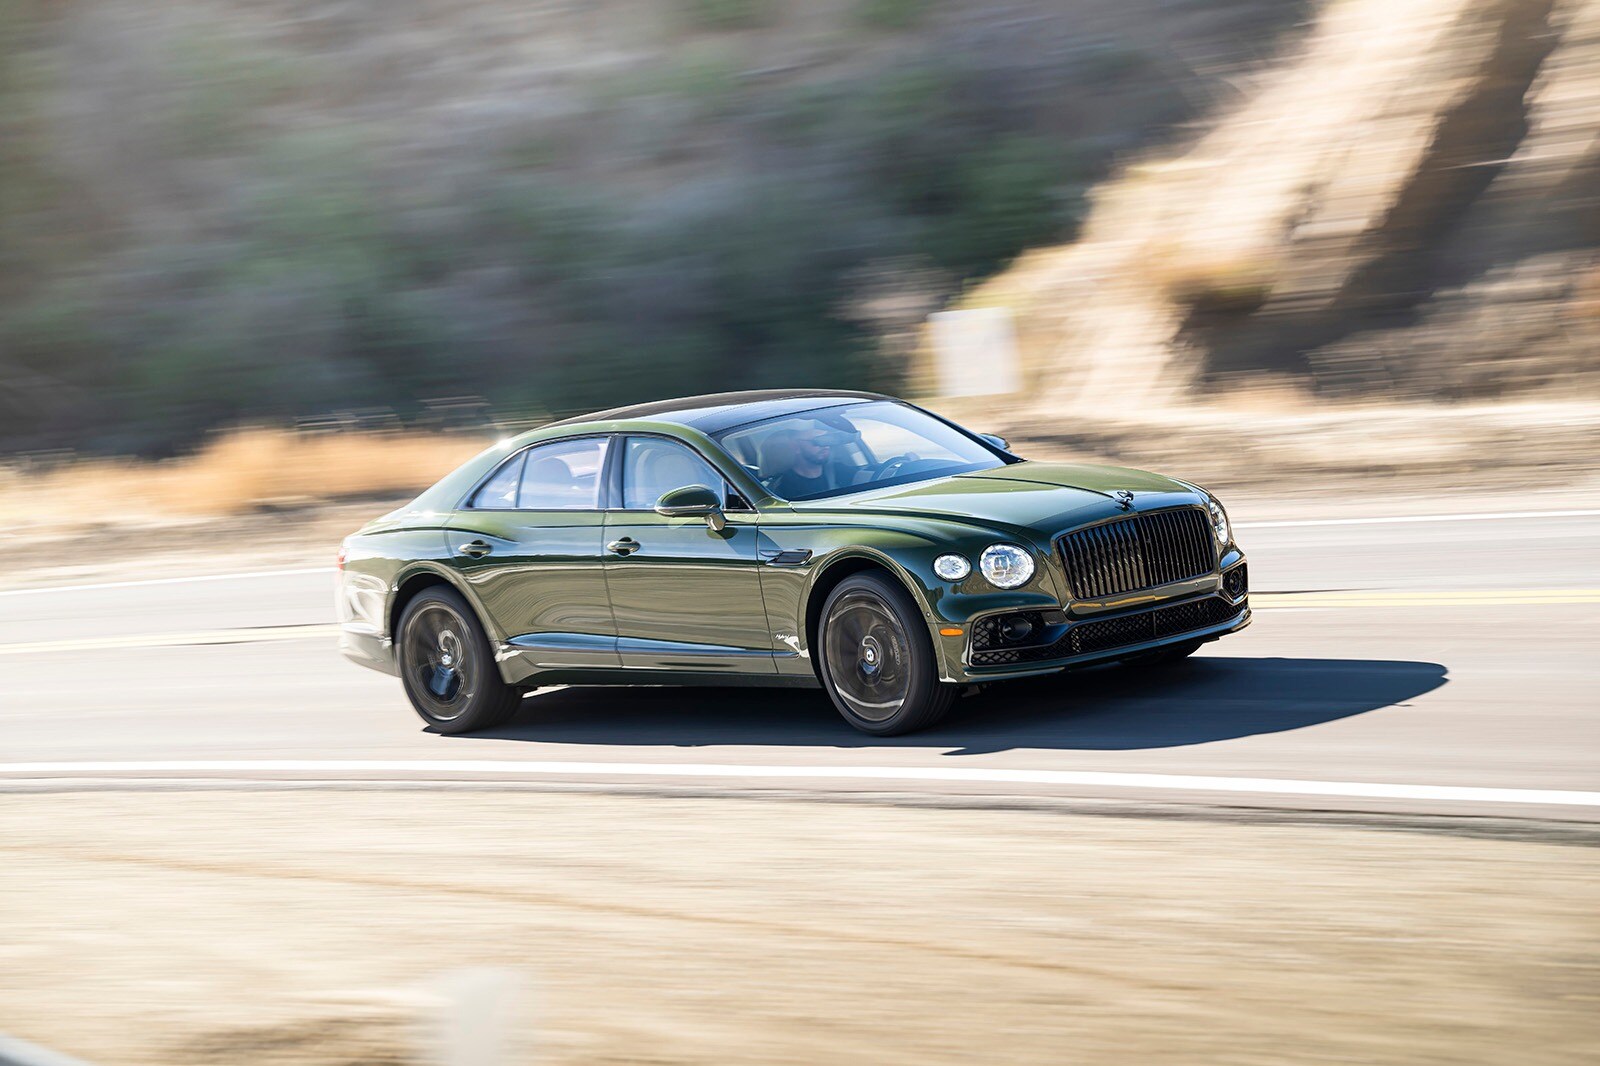 The 2022 Bentley Flying Spur Hybrid Plugs Into a More Responsible Future